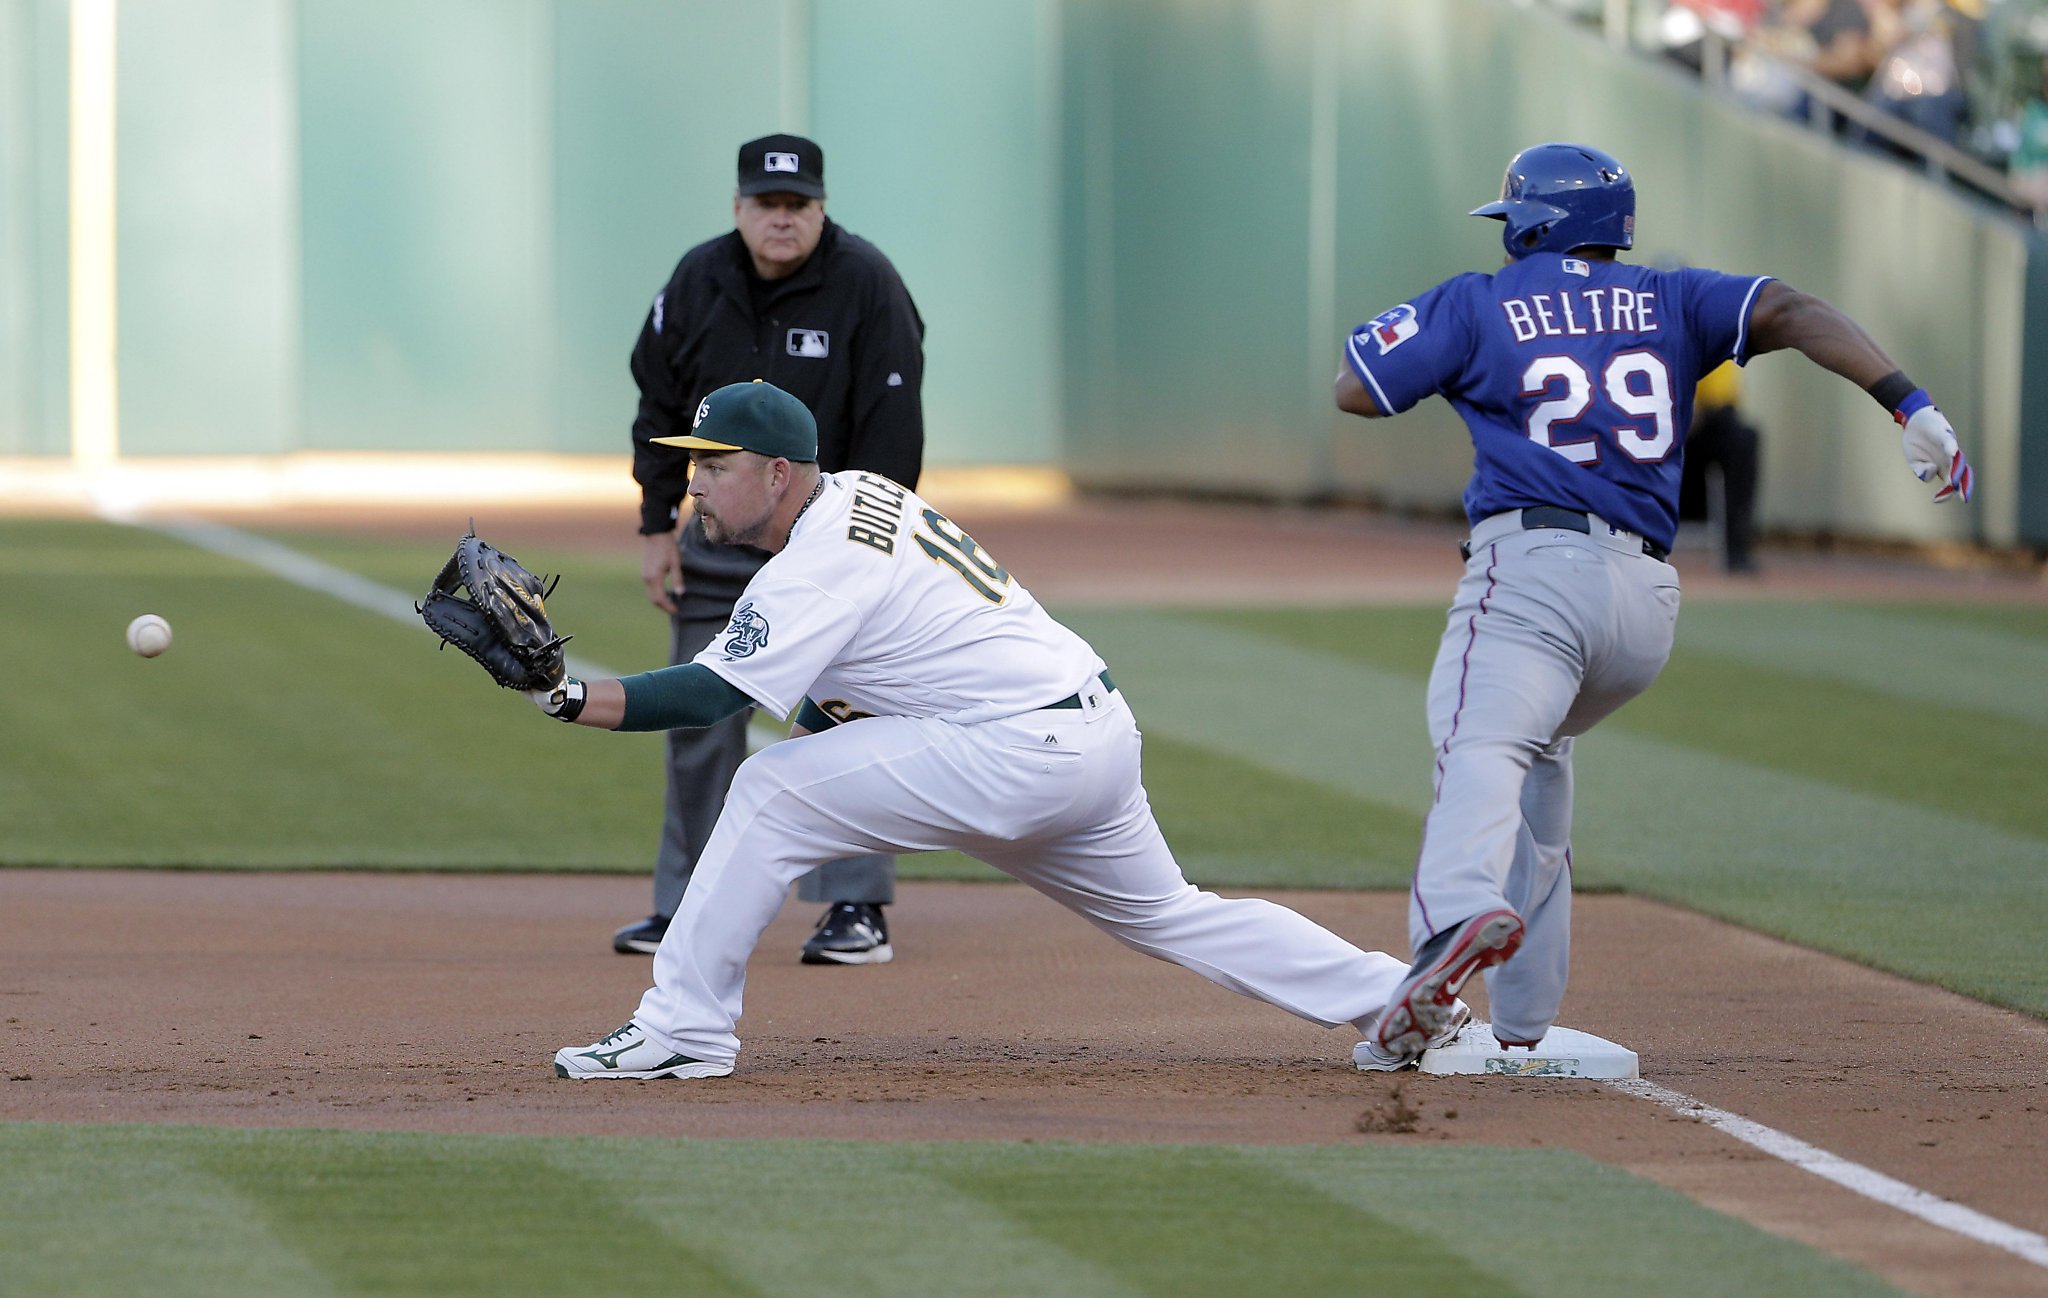 Billy Butler injured by Danny Valencia in altercation, reports SF Chronicle  - Athletics Nation